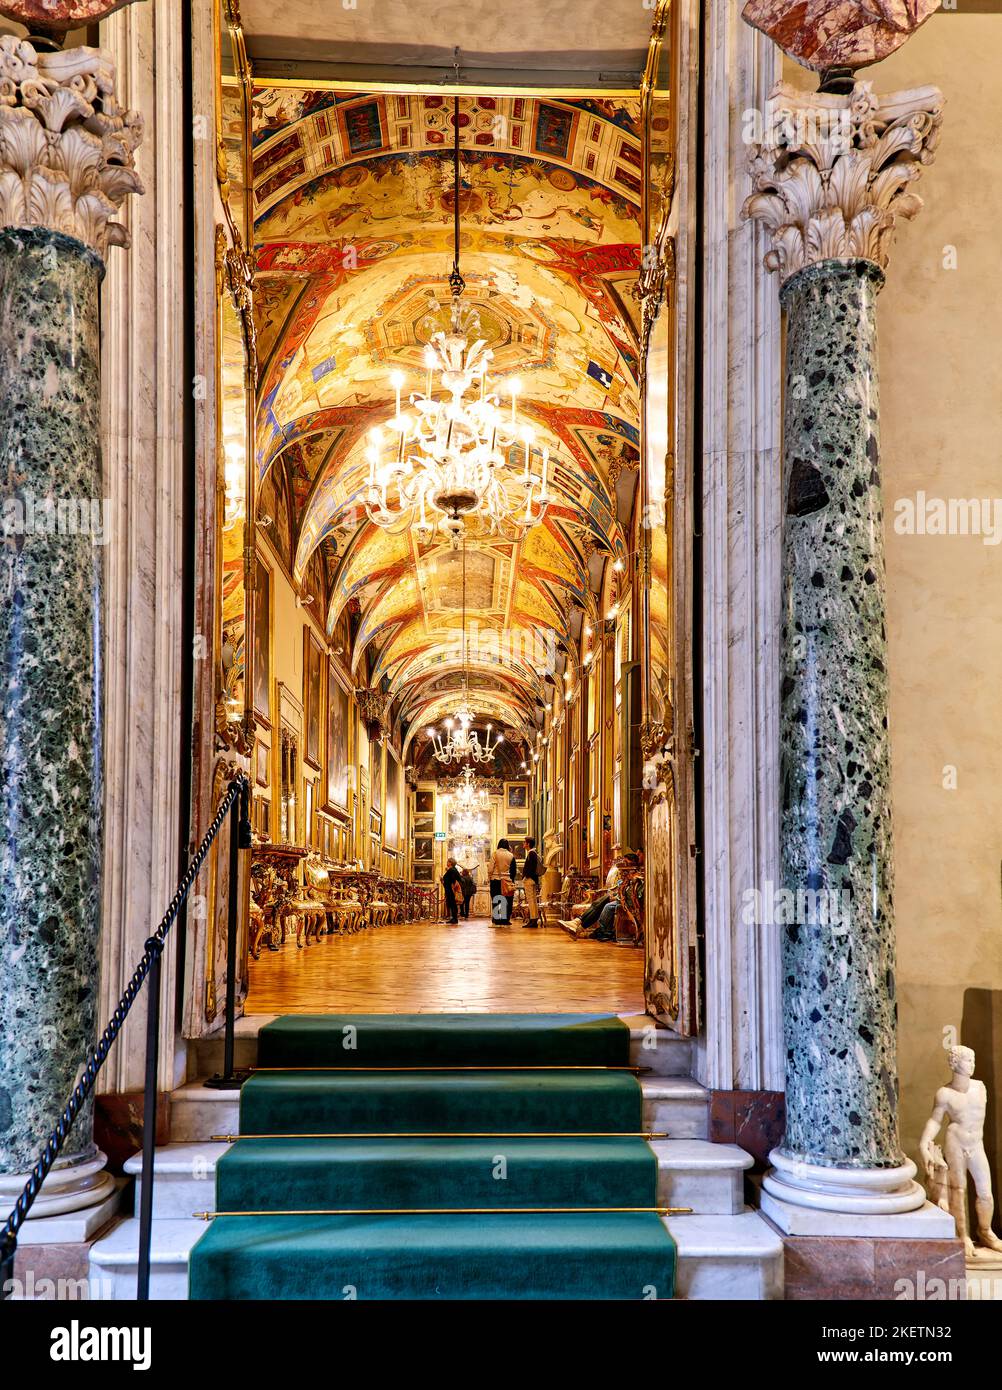 Rome Lazio Italy. The Doria Pamphilj Gallery is a large art collection housed in the Palazzo Doria Pamphilj. Galleria degli specchi (mirrors gallery) Stock Photo